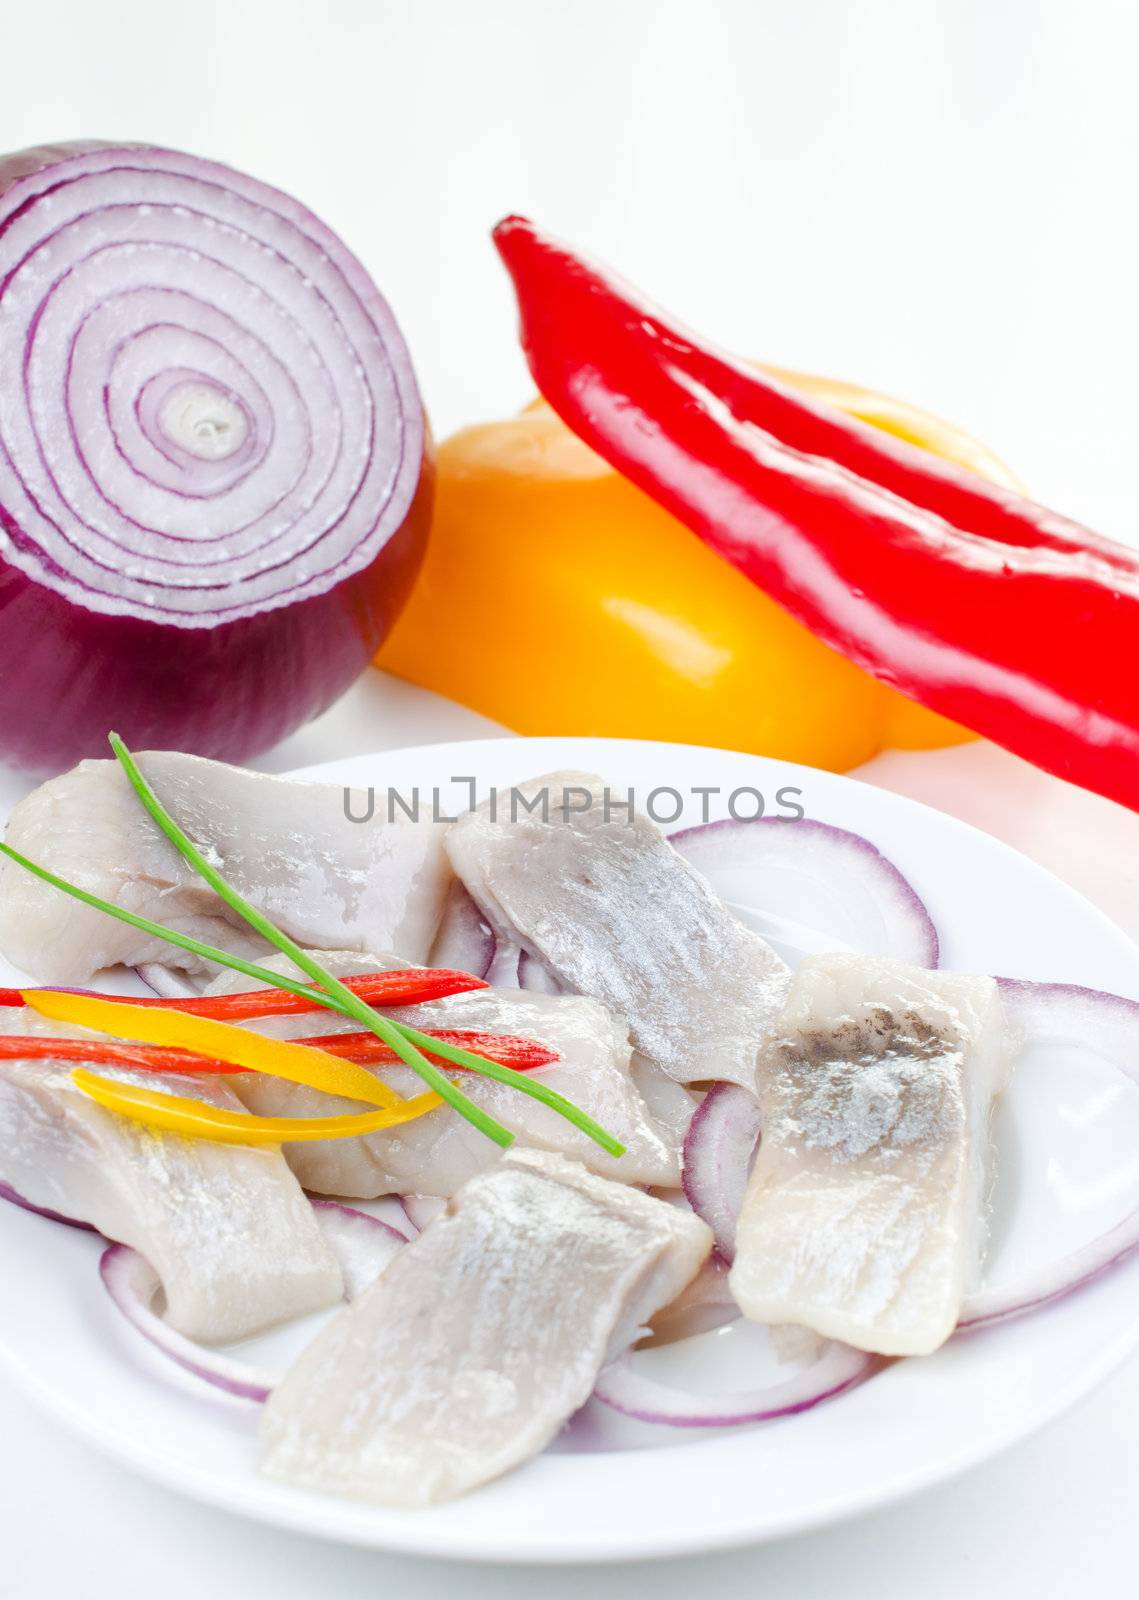 Marinated herring bites on a plate with onion and red and yellow pepper